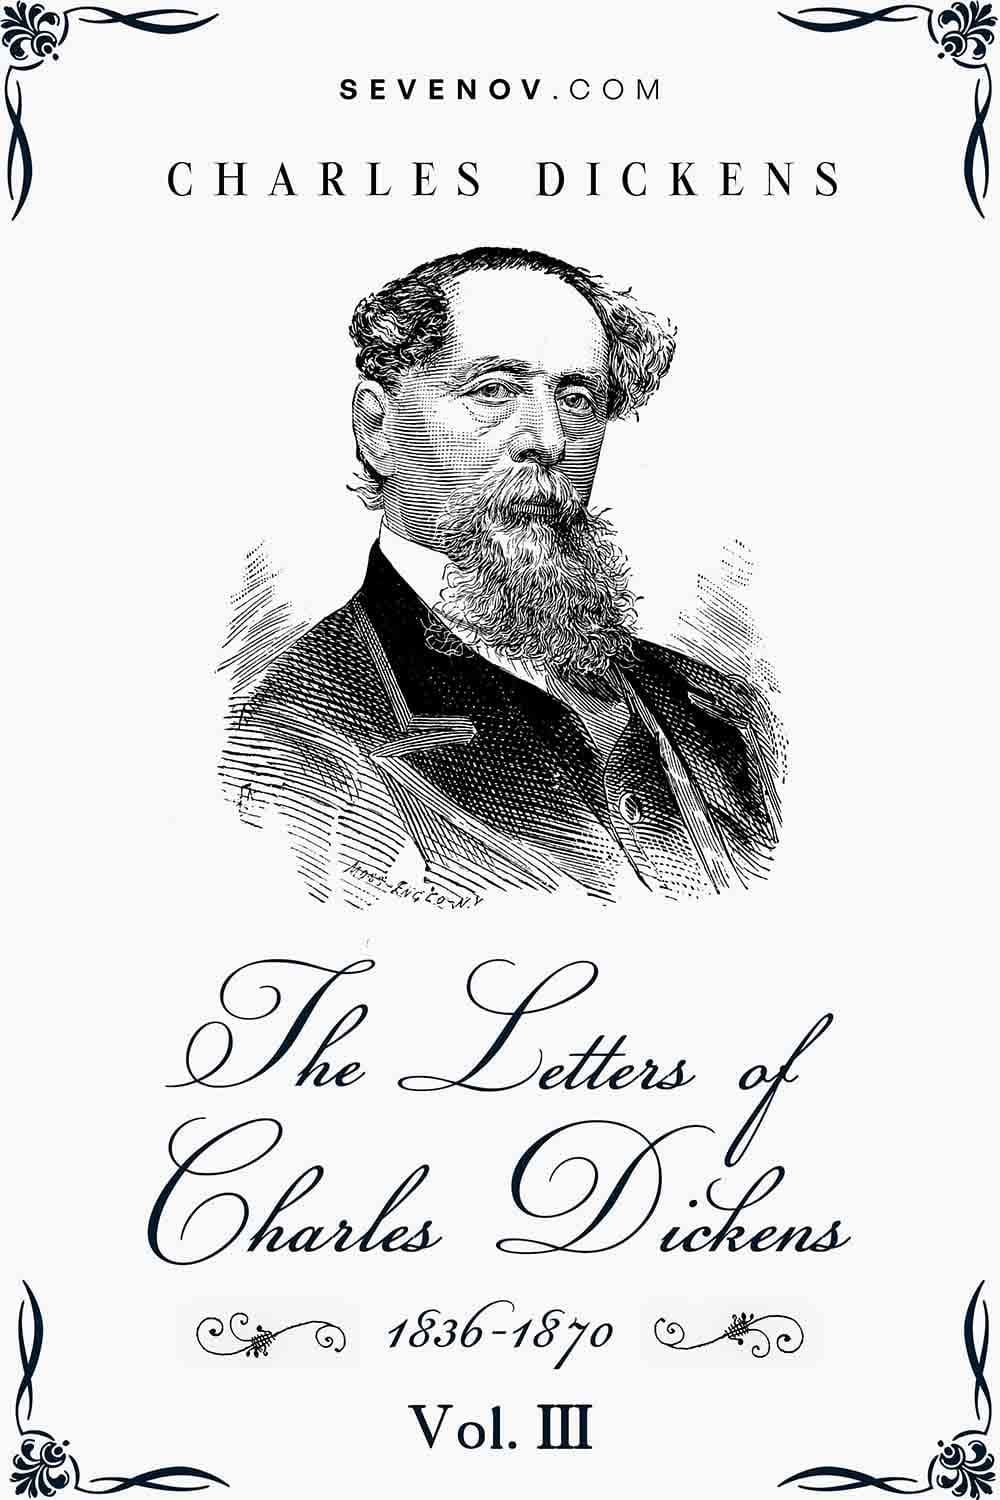 https://pagevio.com/wp-content/uploads/2023/01/the-letters-of-charles-dickens-vol-3-1836-1870-20220901.jpg